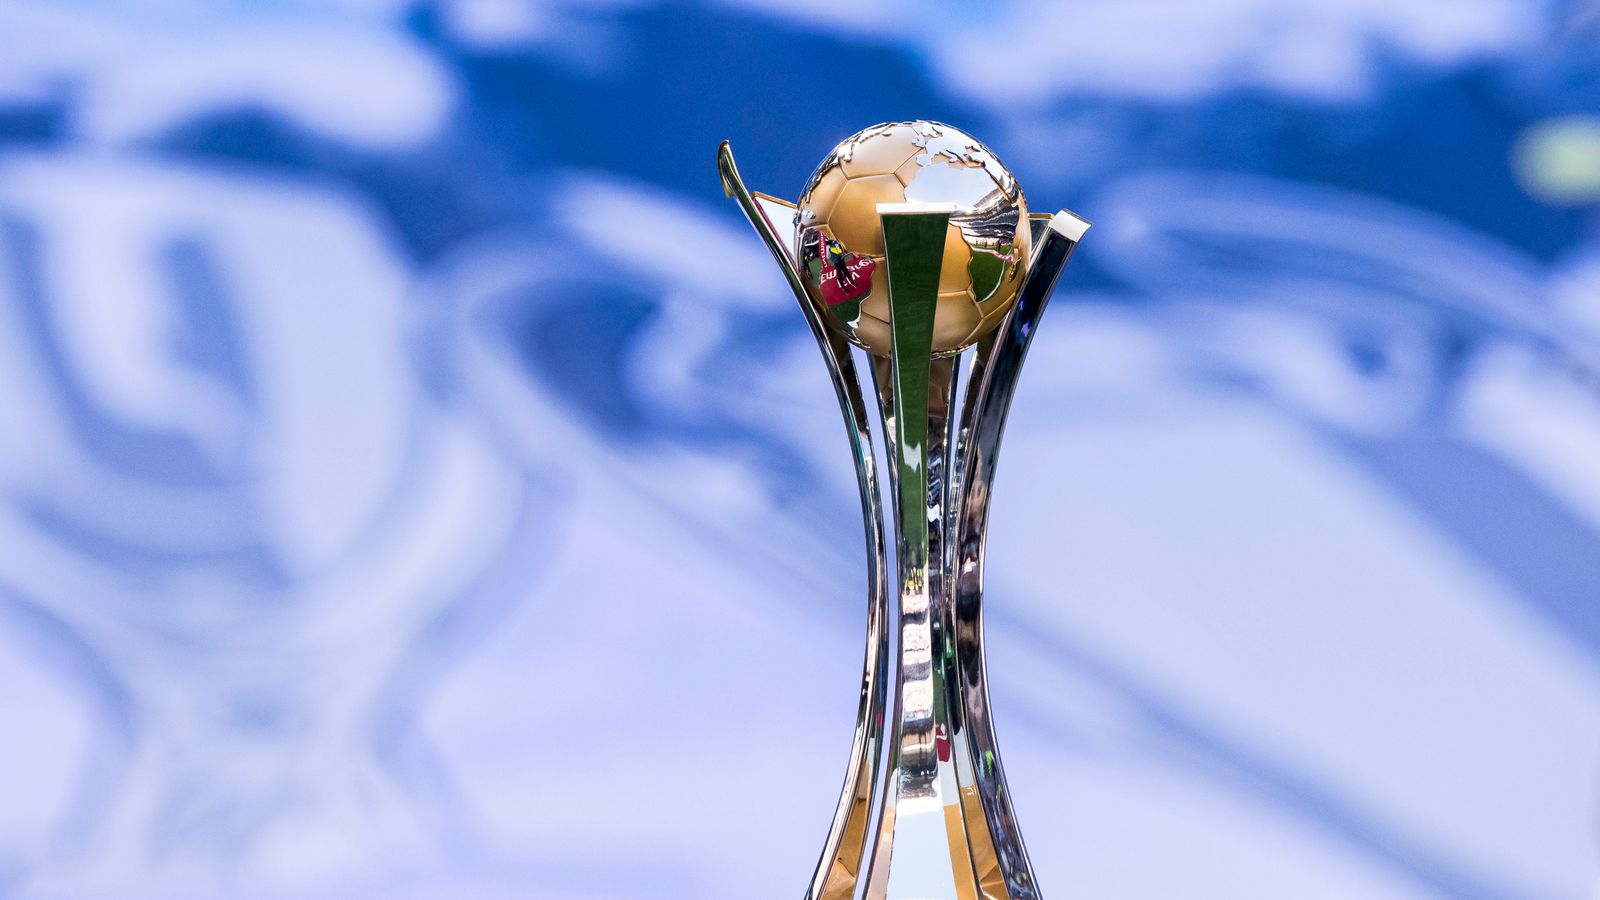 FIFA Club World Cup moved to February 2021 due to coronavirus